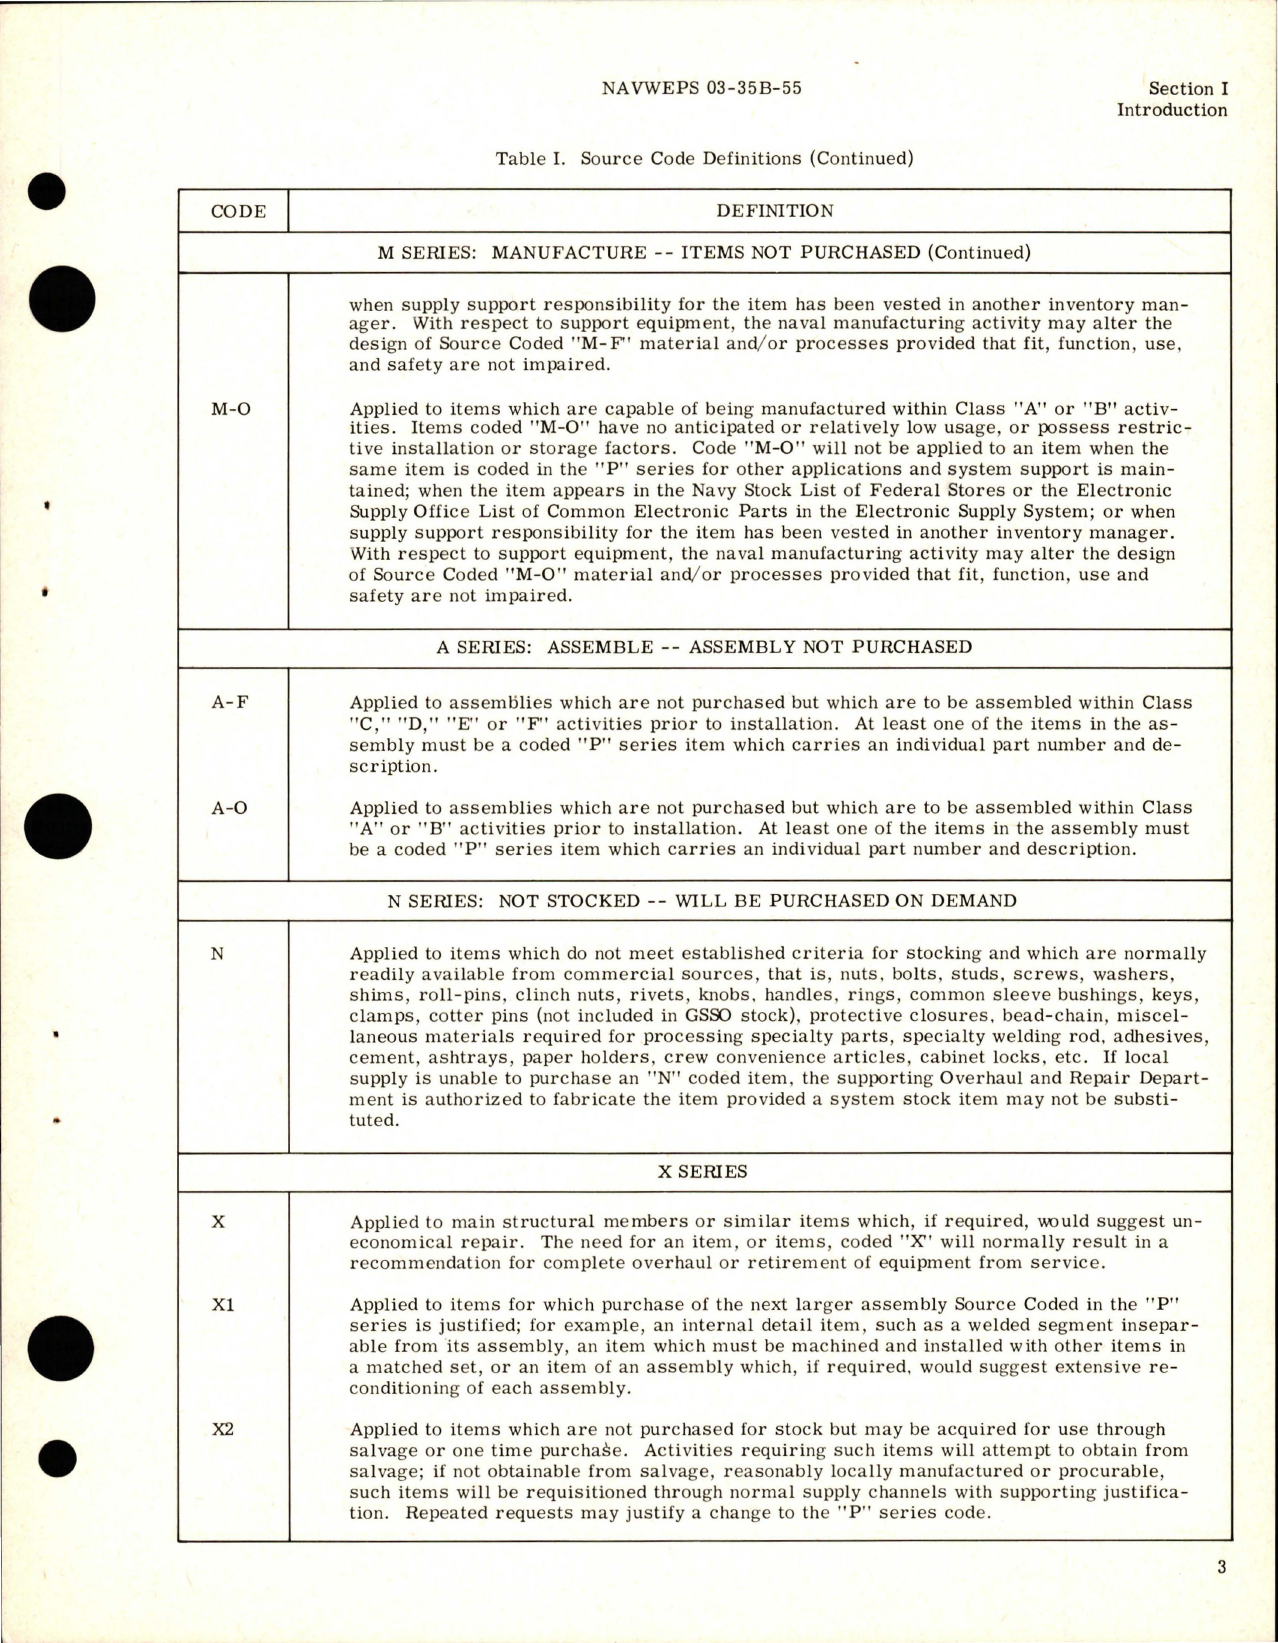 Sample page 5 from AirCorps Library document: Illustrated Parts Breakdown for Master De-Icing Controller and Rotary Blade De-Ice System Tester